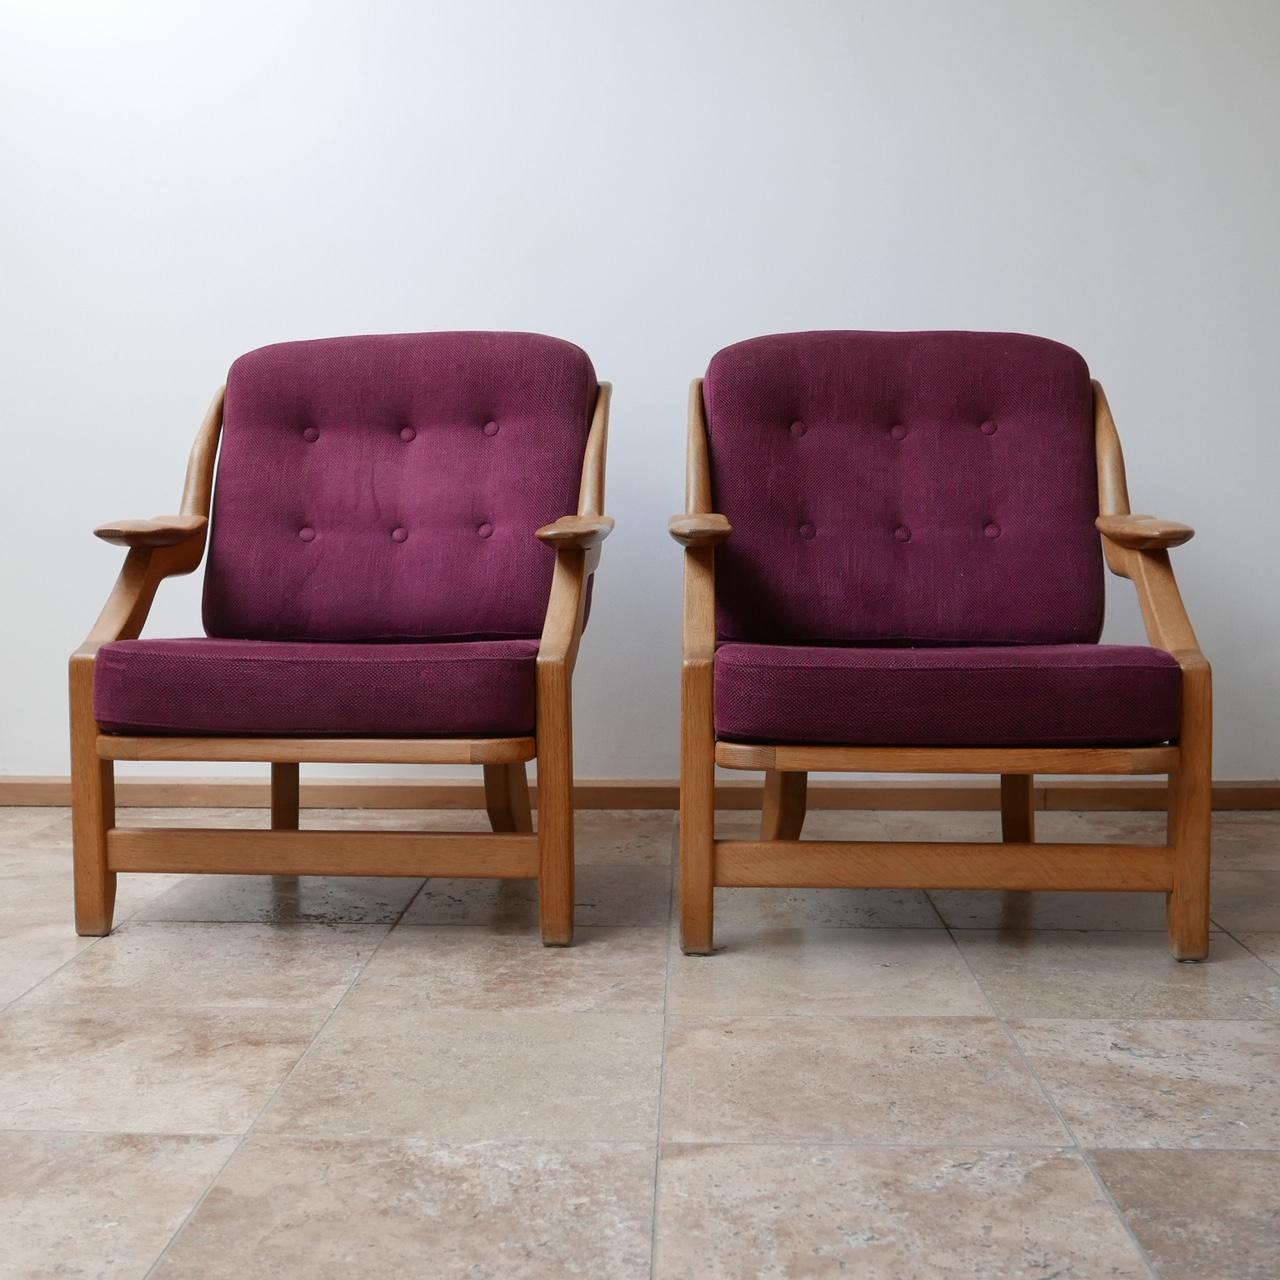 A pair of armchairs by Guillerme et Chambron. 

French, circa 1960s. 

Solid oak and upholstery. 

Original upholstery, which can be updated but is perfectly usable. 

Dimensions: 77 W x 86 D x 41 seat height x 90 total height in cm.